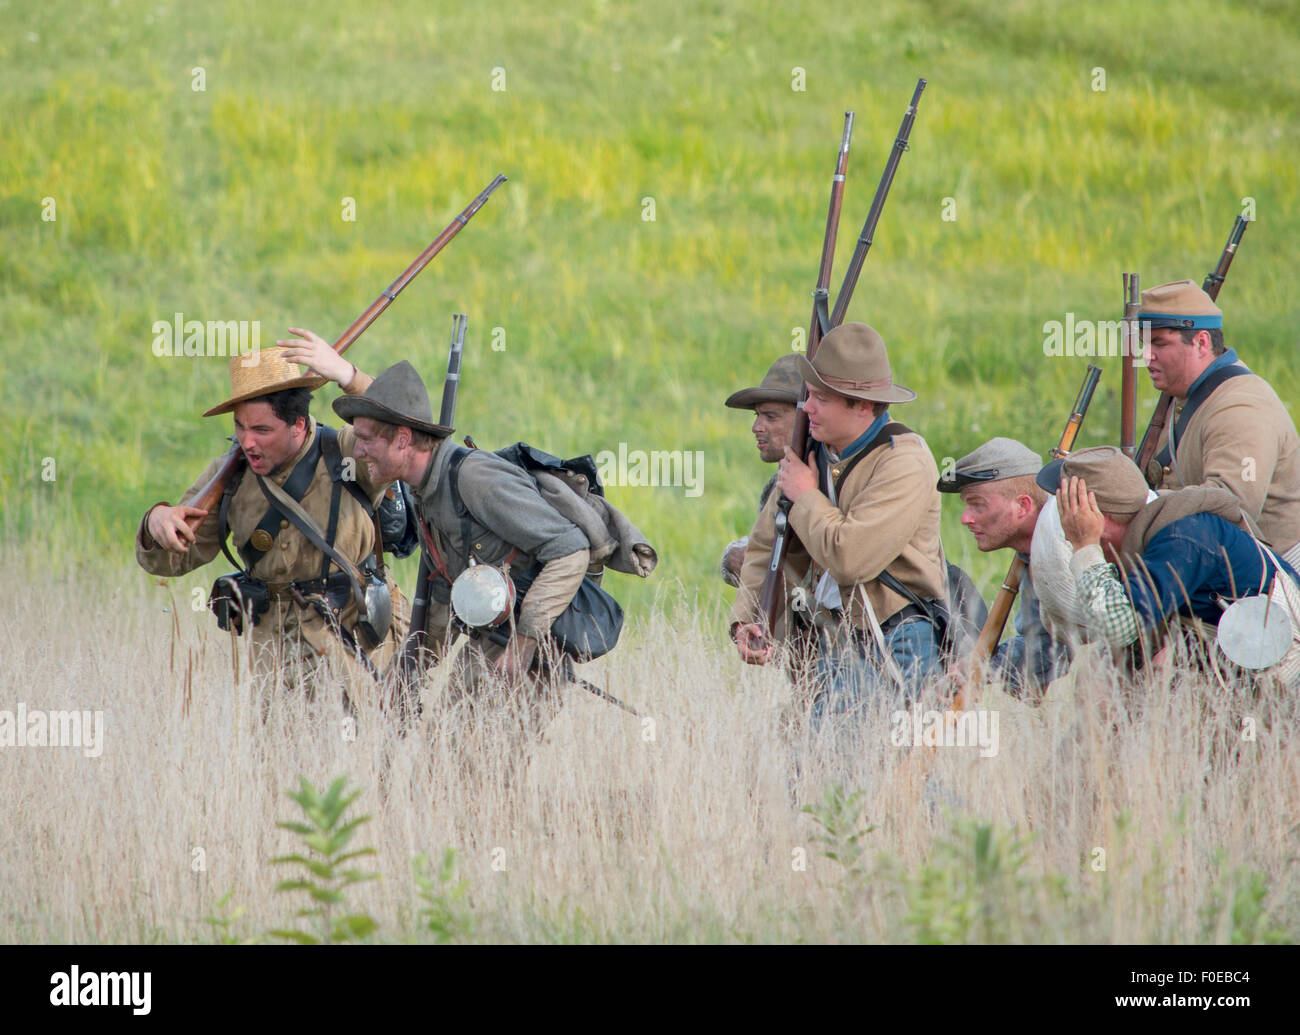 Gettysburg Confederate Army marching through fields Stock Photo